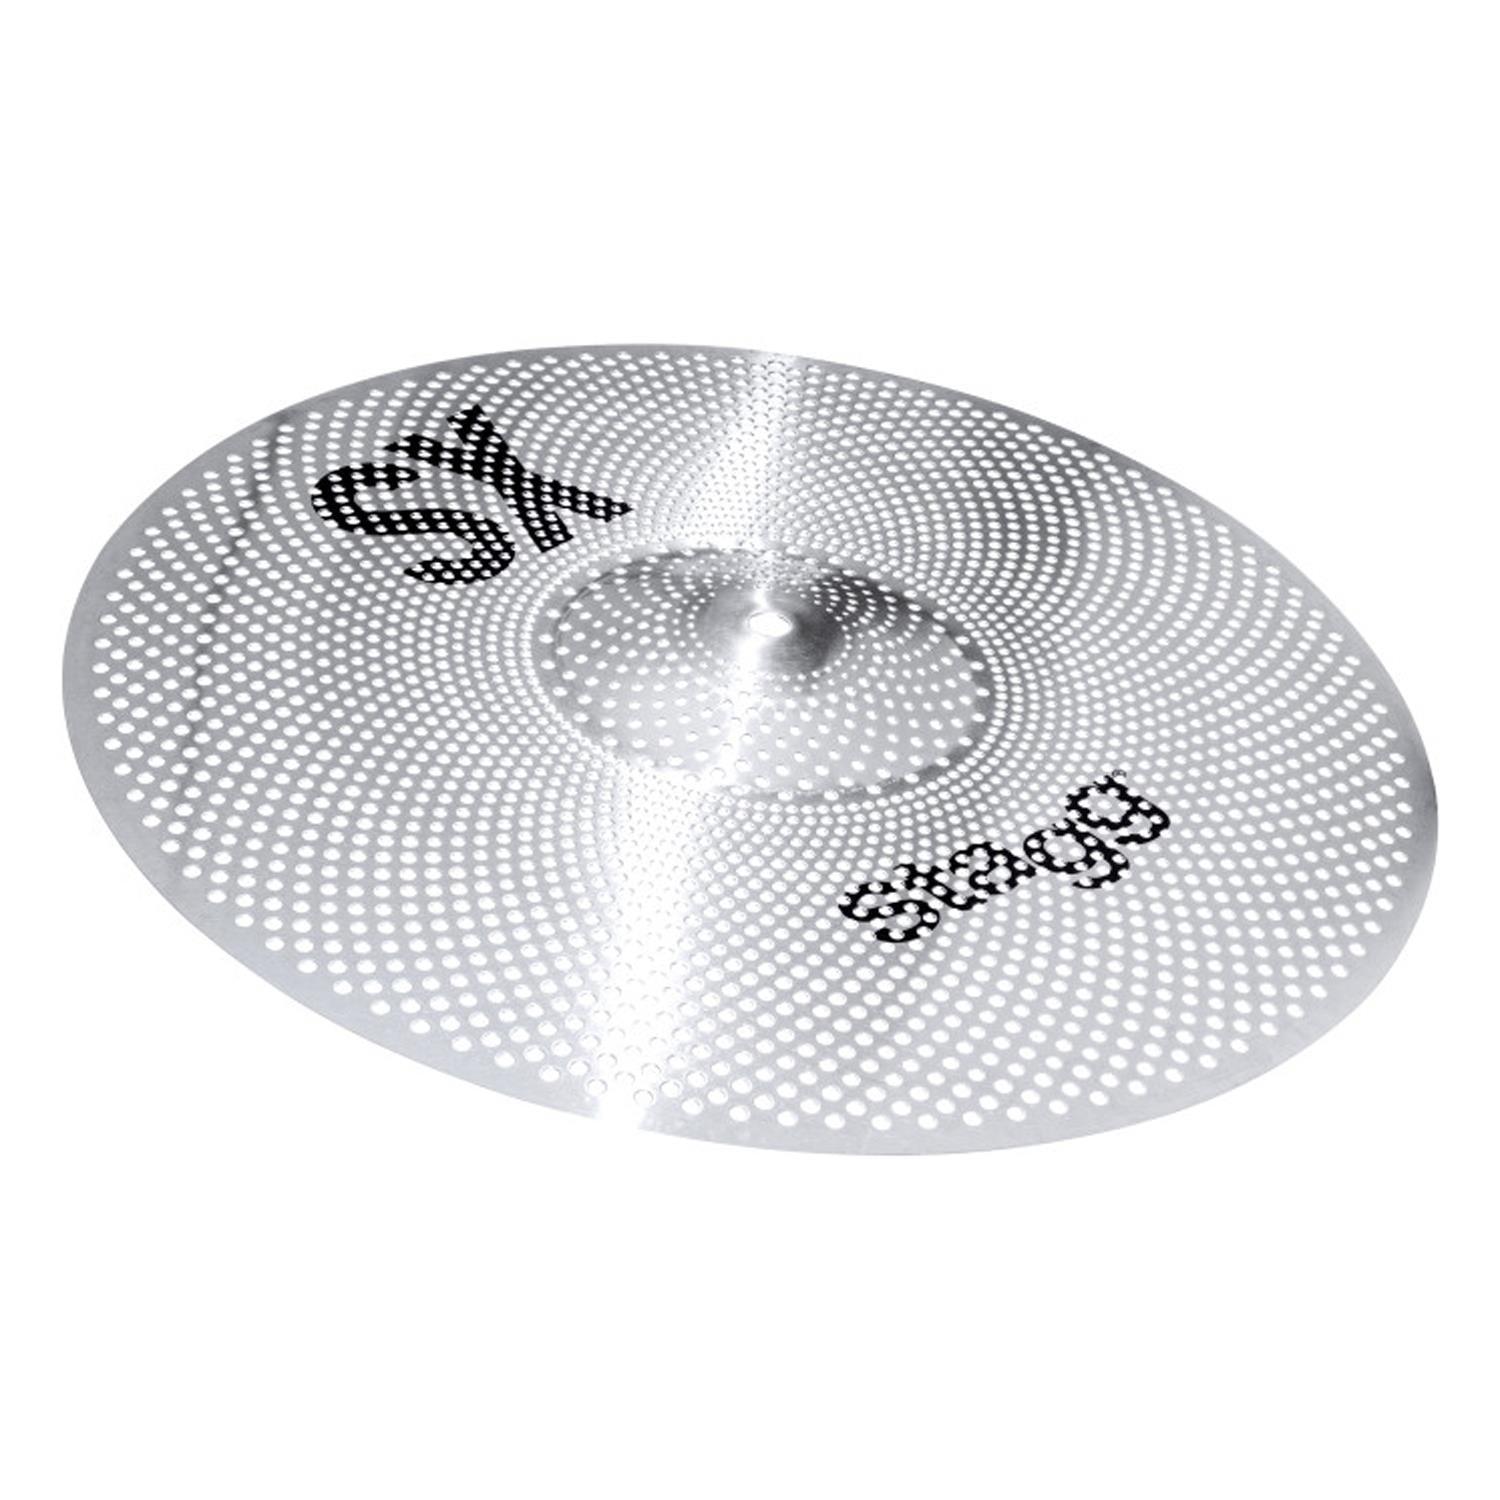 Stagg SXM-CM18 Low Volume 18" Cymbal Crash or Ride - DY Pro Audio